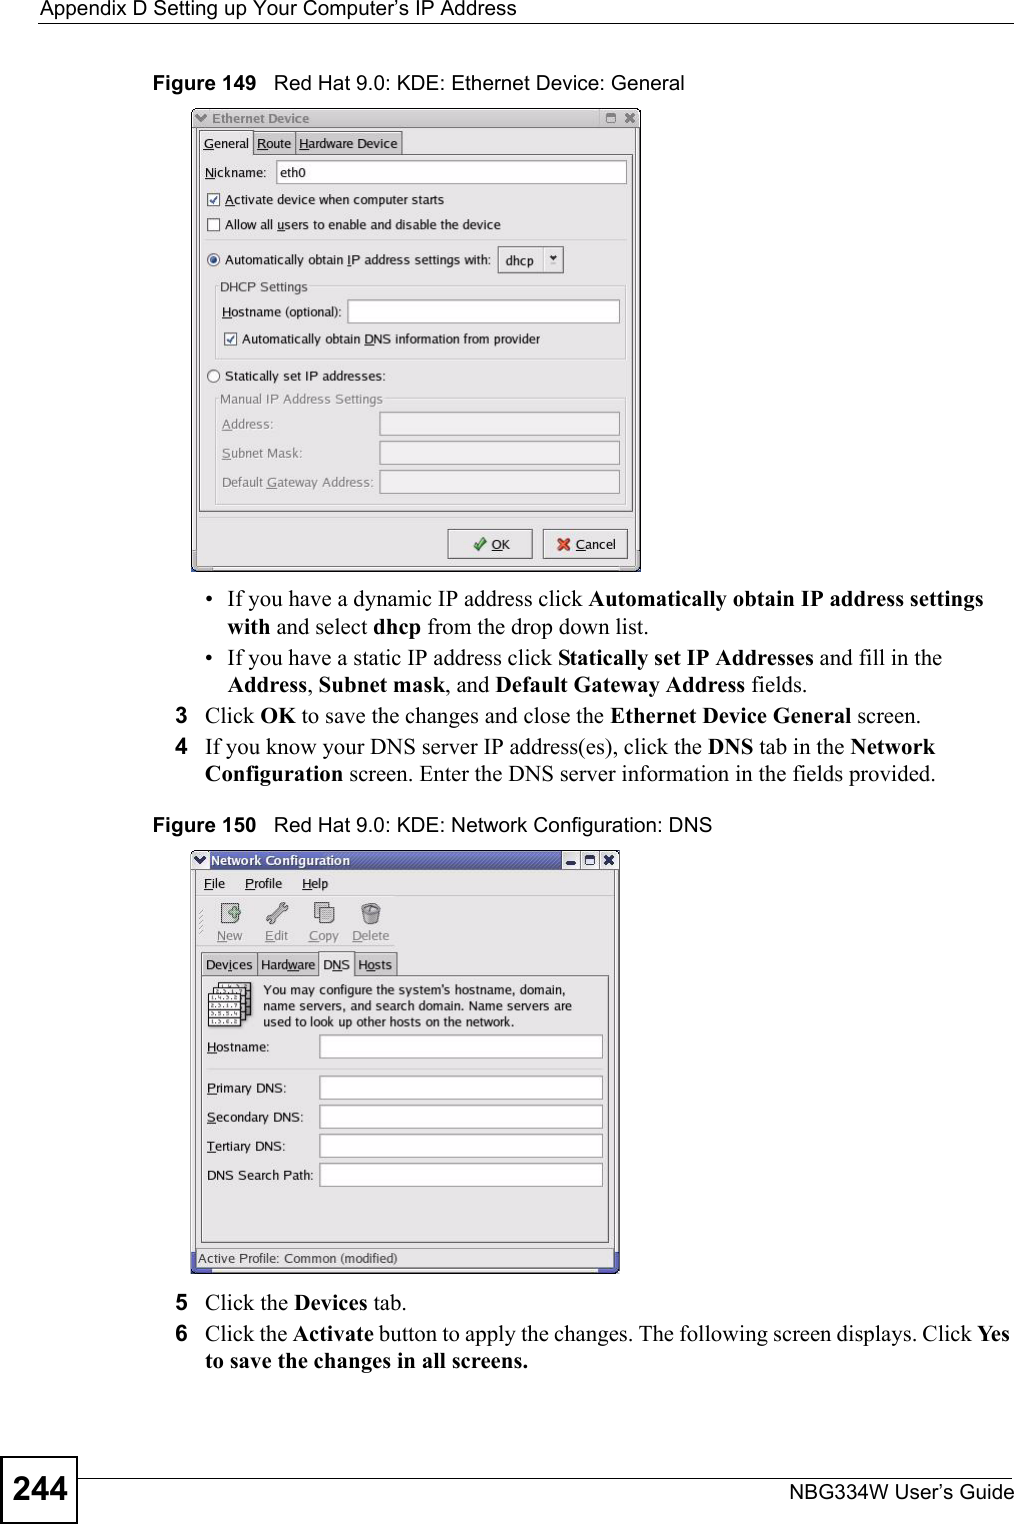 Appendix D Setting up Your Computer’s IP AddressNBG334W User’s Guide244Figure 149   Red Hat 9.0: KDE: Ethernet Device: General • If you have a dynamic IP address click Automatically obtain IP address settings with and select dhcp from the drop down list. • If you have a static IP address click Statically set IP Addresses and fill in the  Address, Subnet mask, and Default Gateway Address fields. 3Click OK to save the changes and close the Ethernet Device General screen. 4If you know your DNS server IP address(es), click the DNS tab in the Network Configuration screen. Enter the DNS server information in the fields provided. Figure 150   Red Hat 9.0: KDE: Network Configuration: DNS 5Click the Devices tab. 6Click the Activate button to apply the changes. The following screen displays. Click Yes to save the changes in all screens.